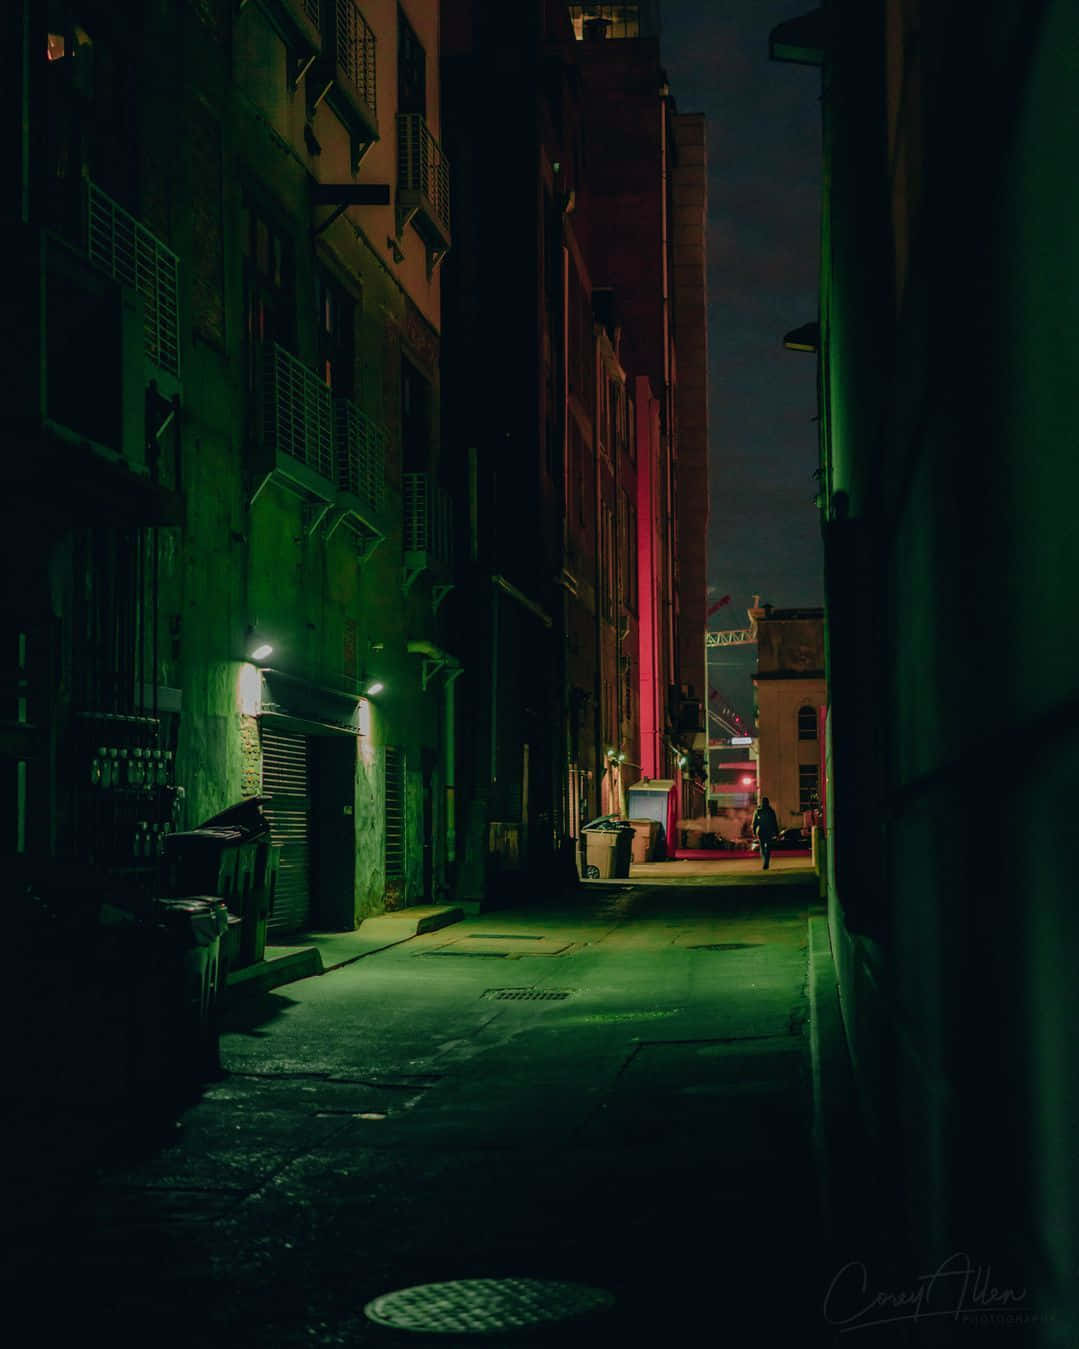 A Street With Buildings And A Green Light